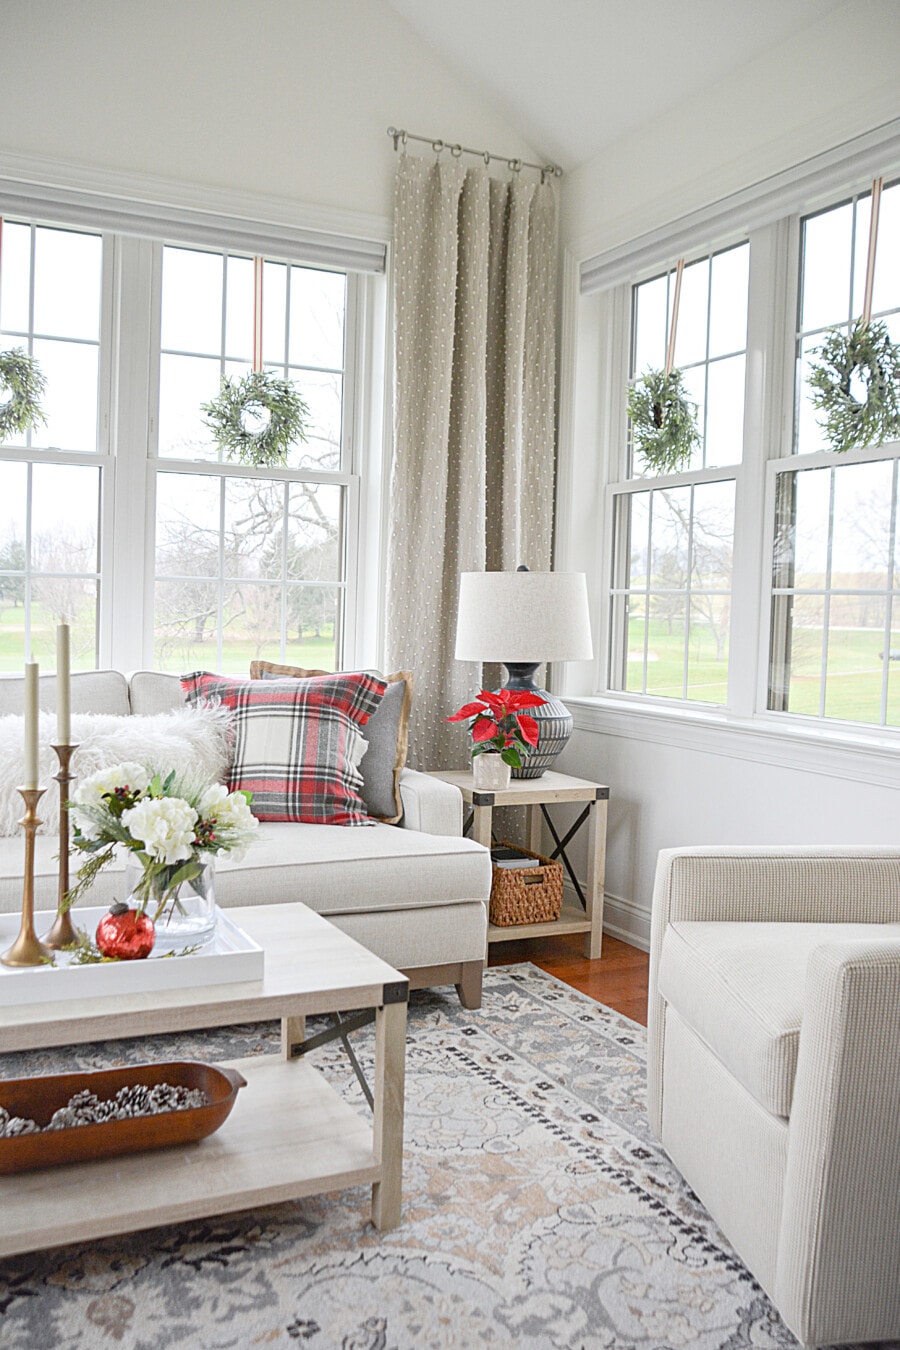 Tips For Decorating A Small Space For Christmas